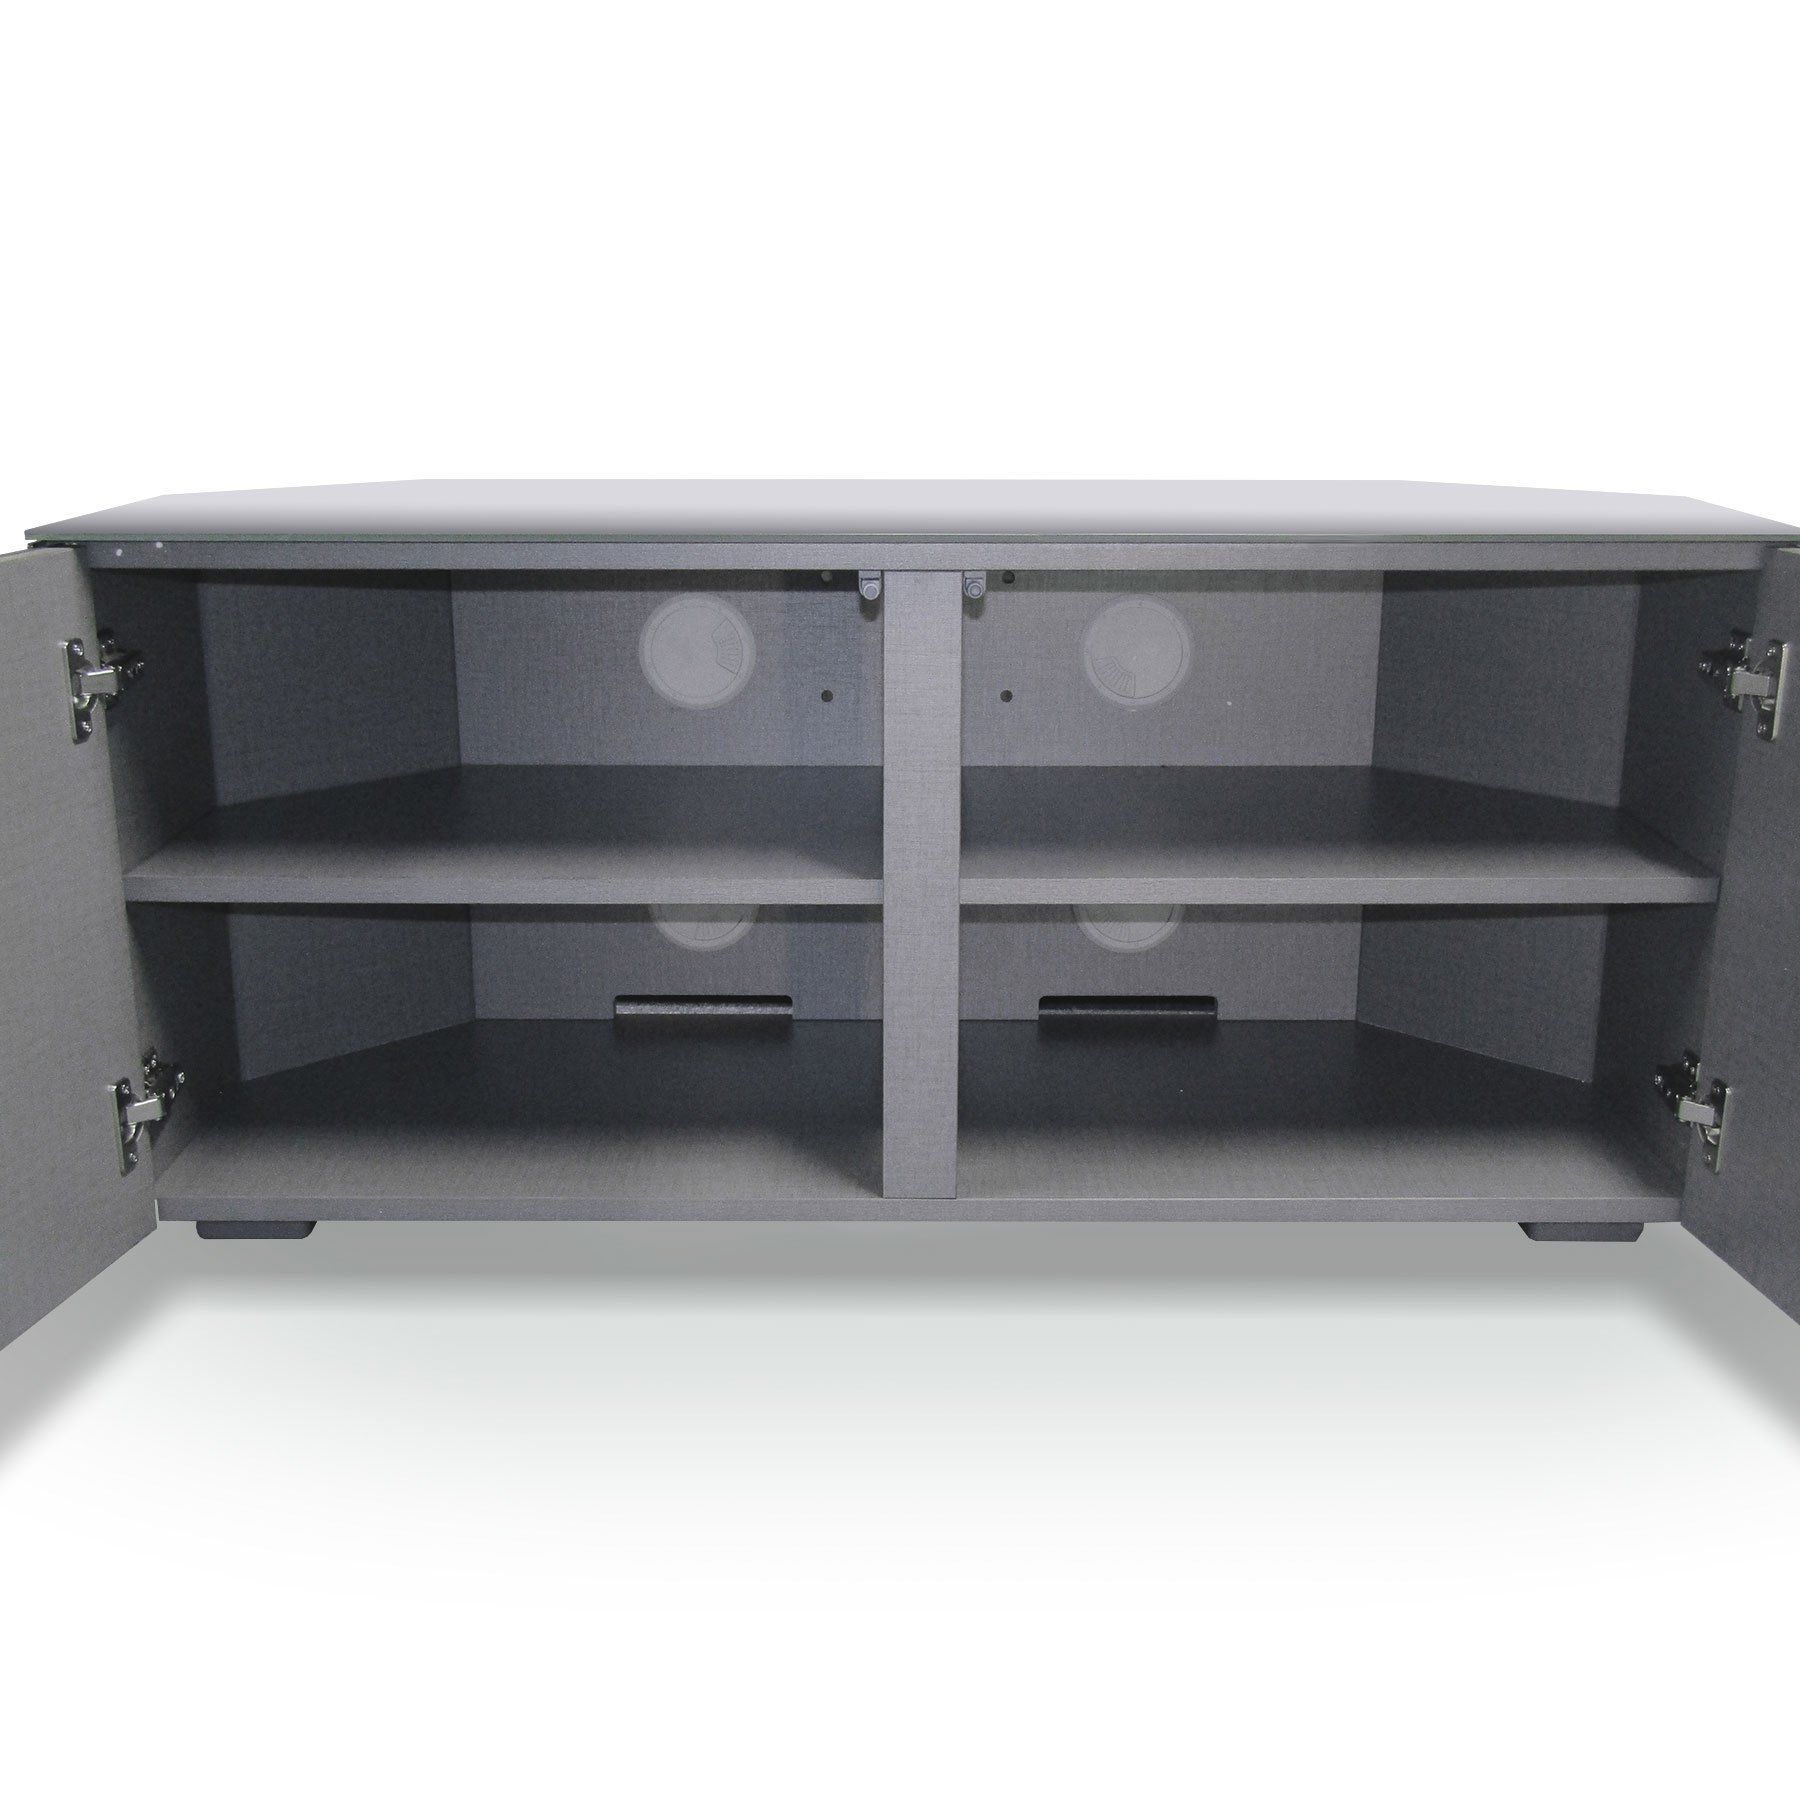 Invictus White High Gloss Corner Tv Stand For Up To 55" Tvs Intended For High Gloss White Tv Stands (View 9 of 15)